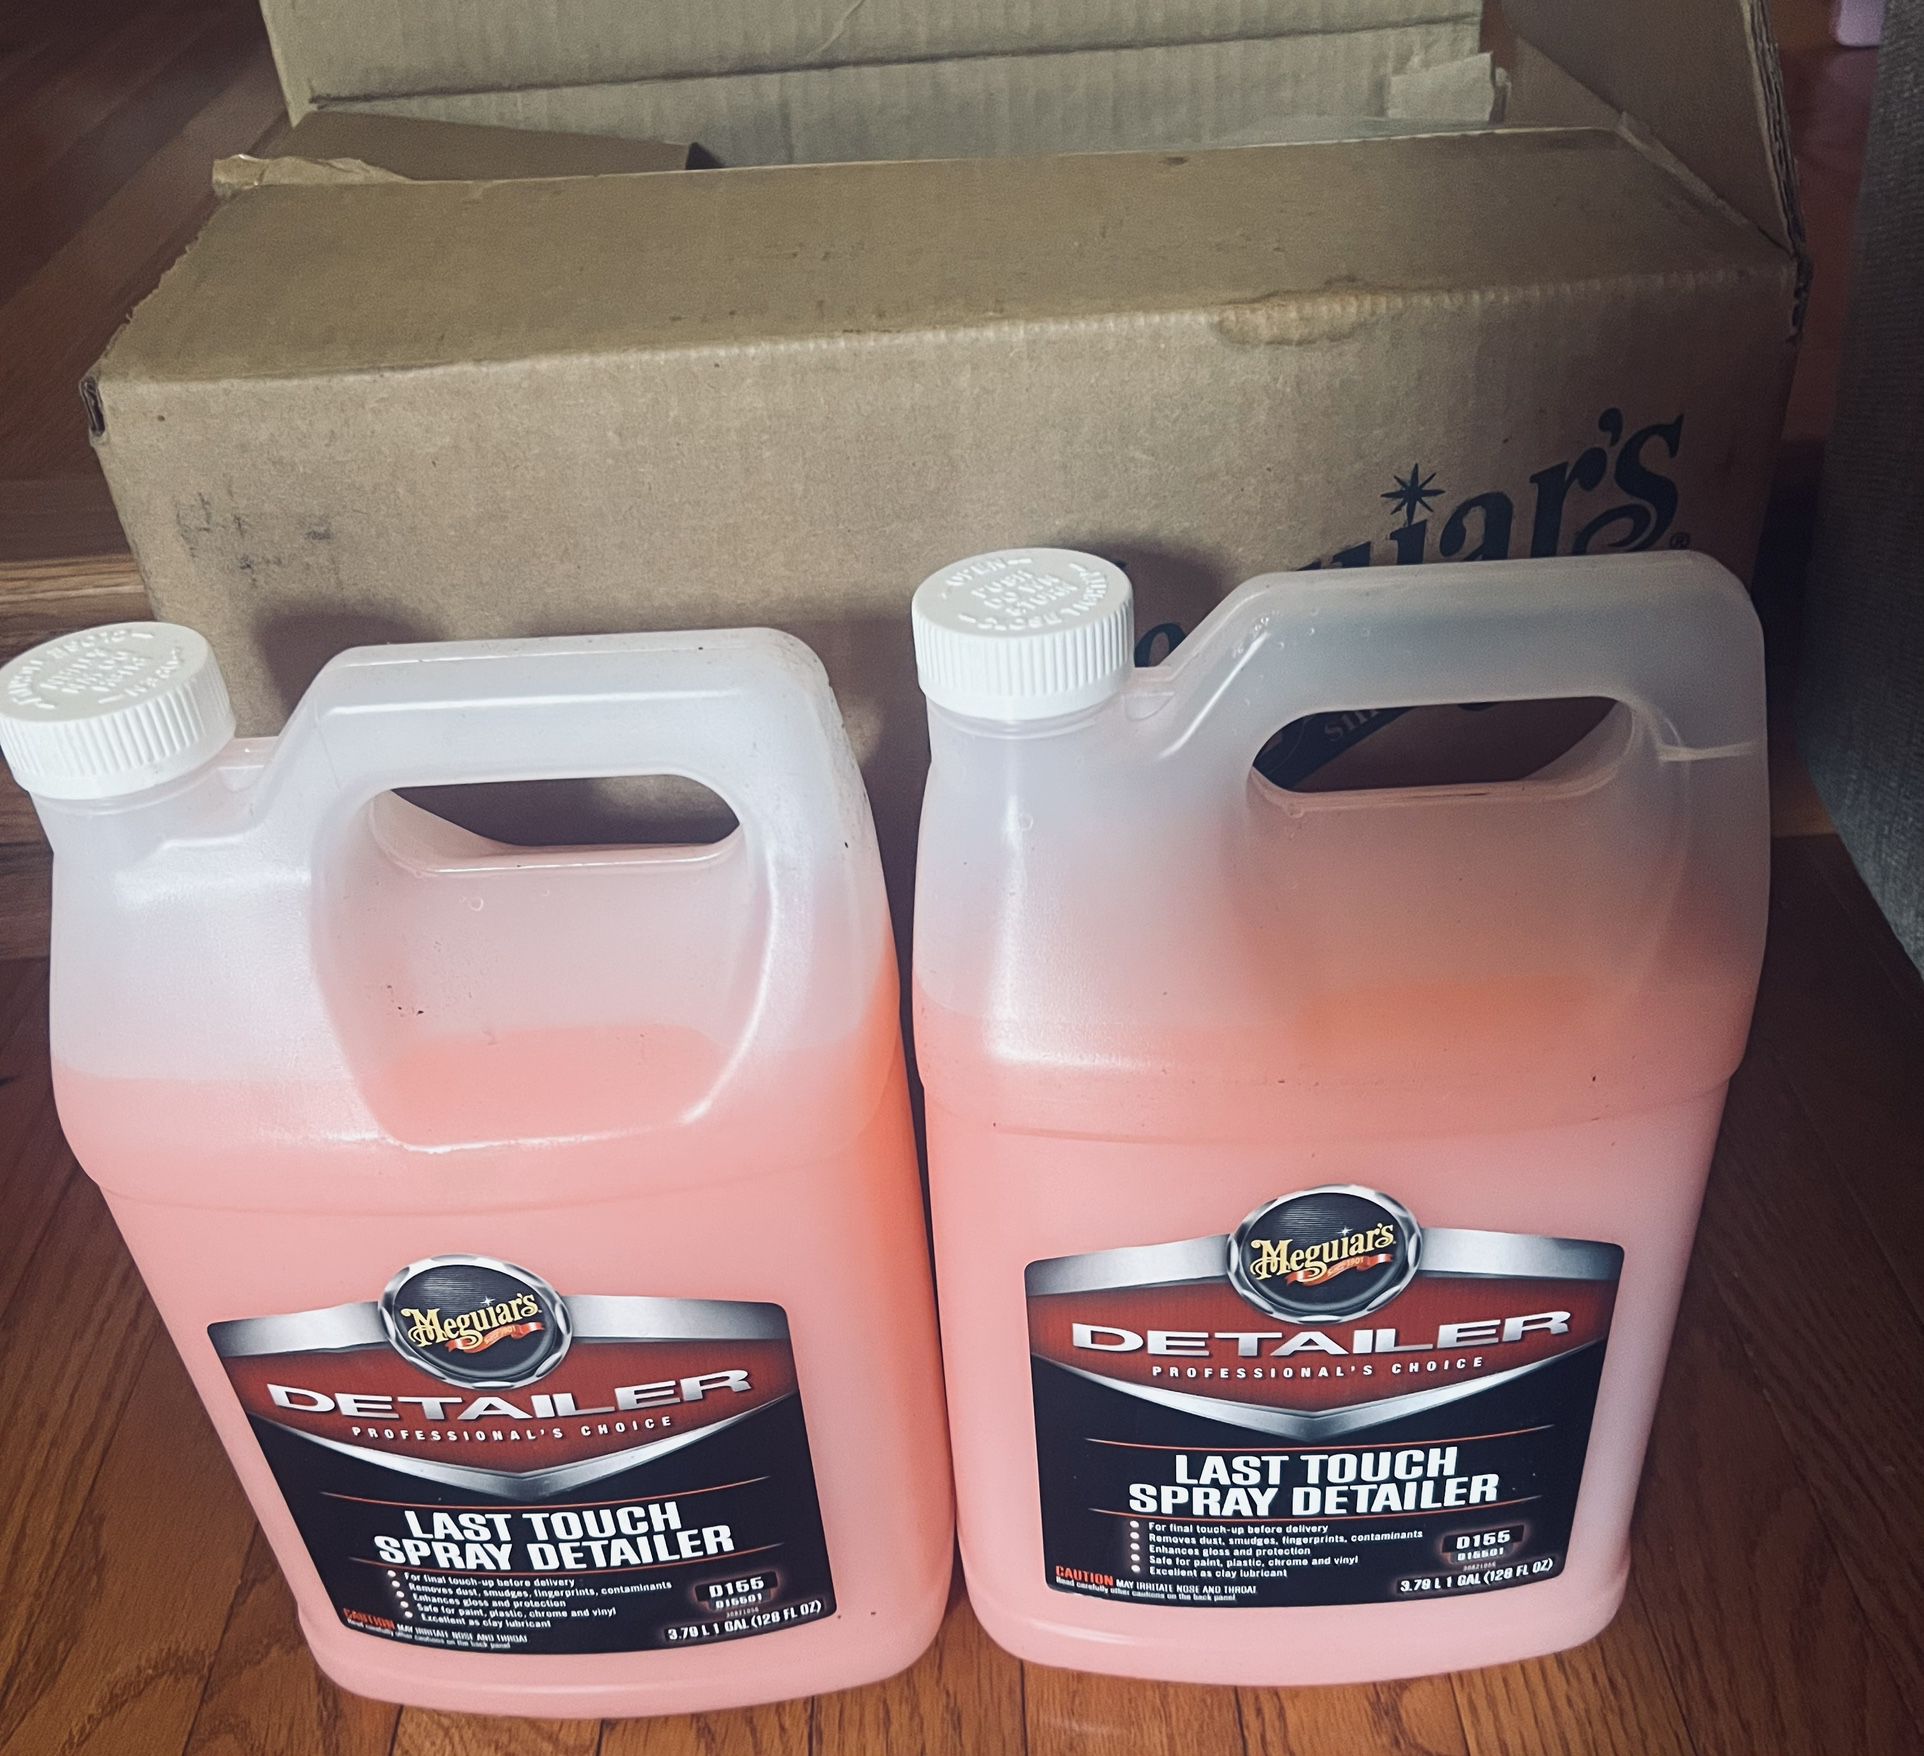 Last Touch Spray Detailer 5 Gallons